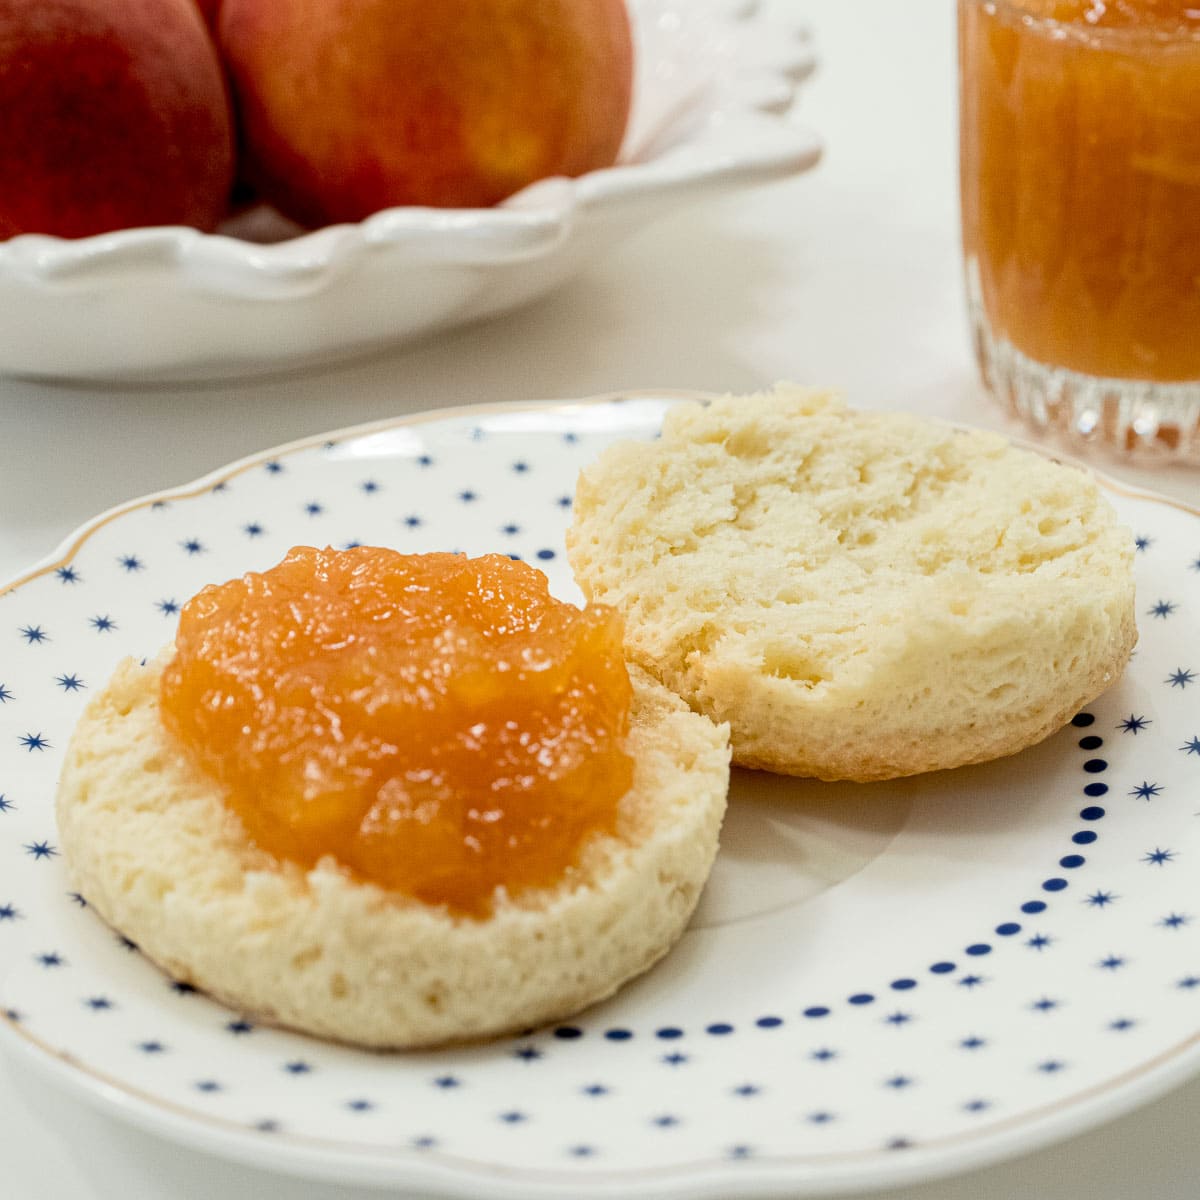 Peach Jam sits on a biscuit with a bowl of peaches and a container of jam behind it.